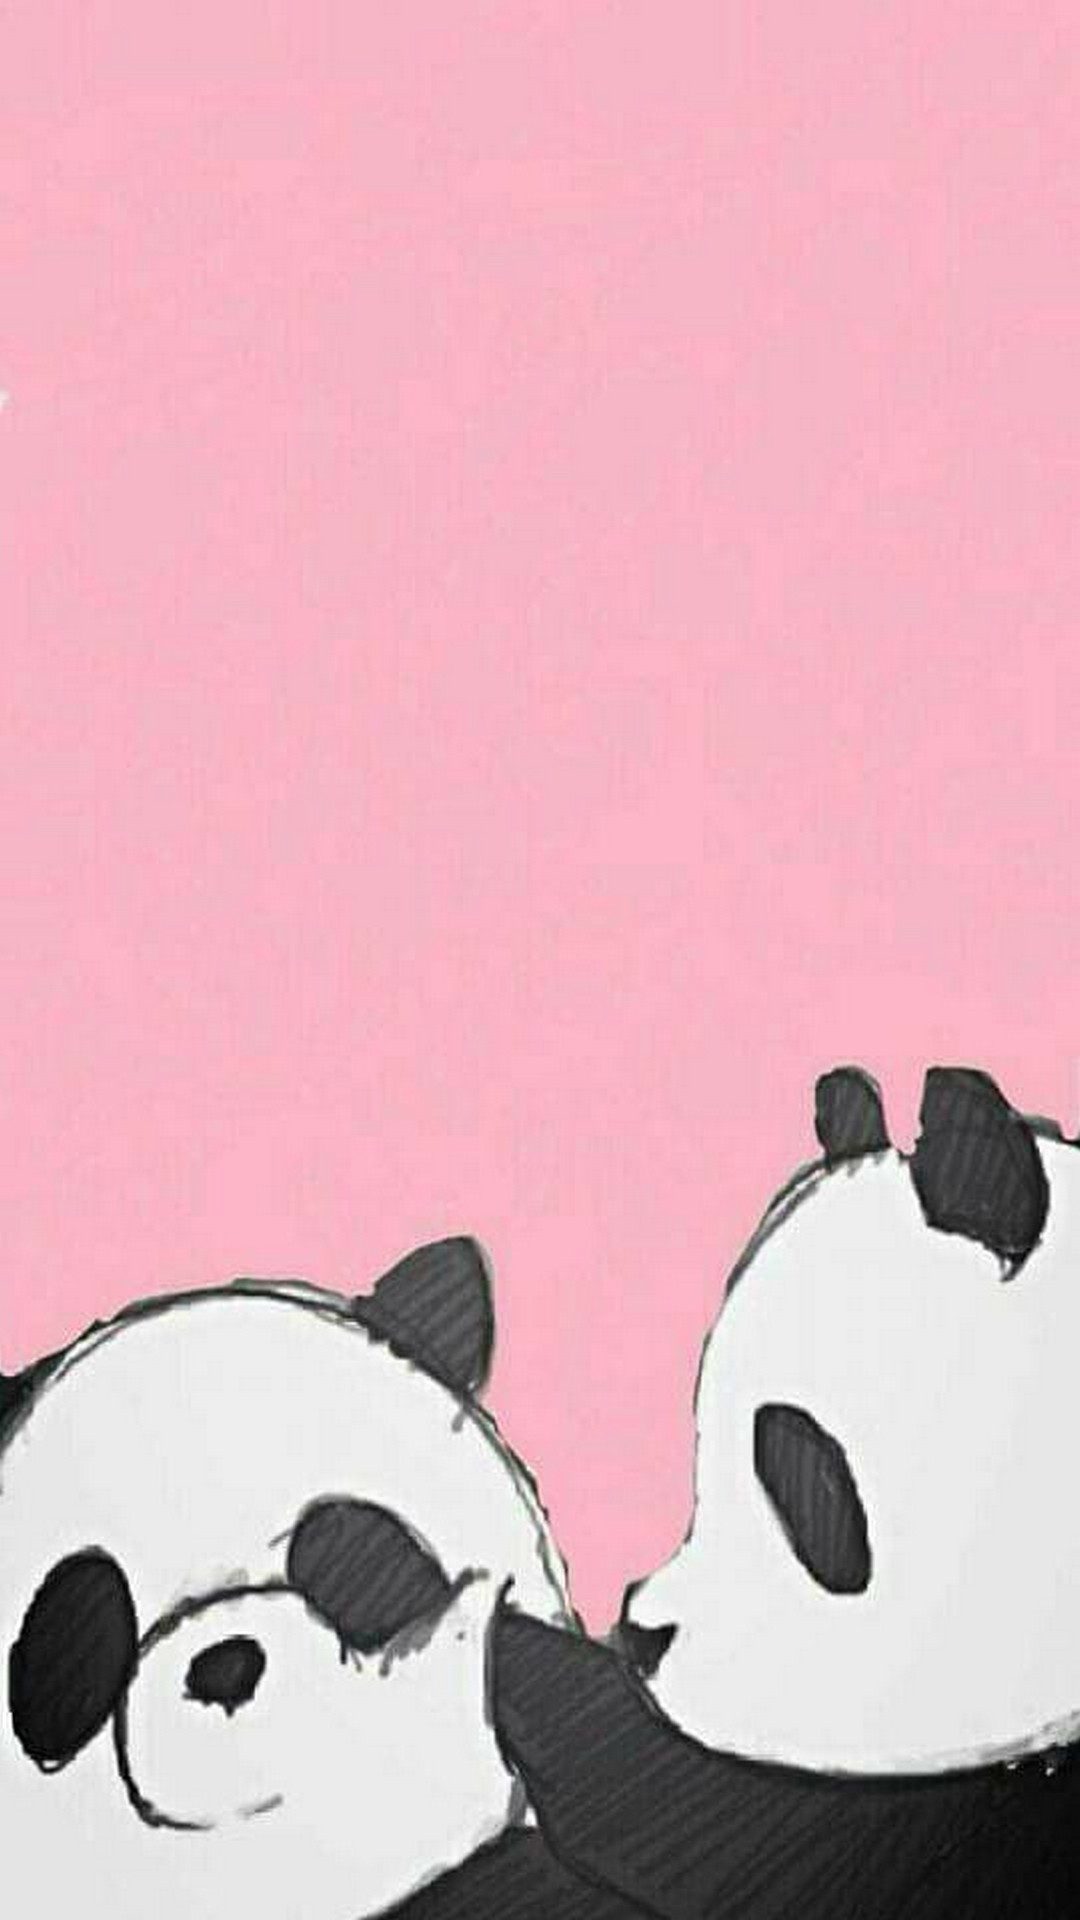 Panda Wallpaper For Mobile Android 1080x1920